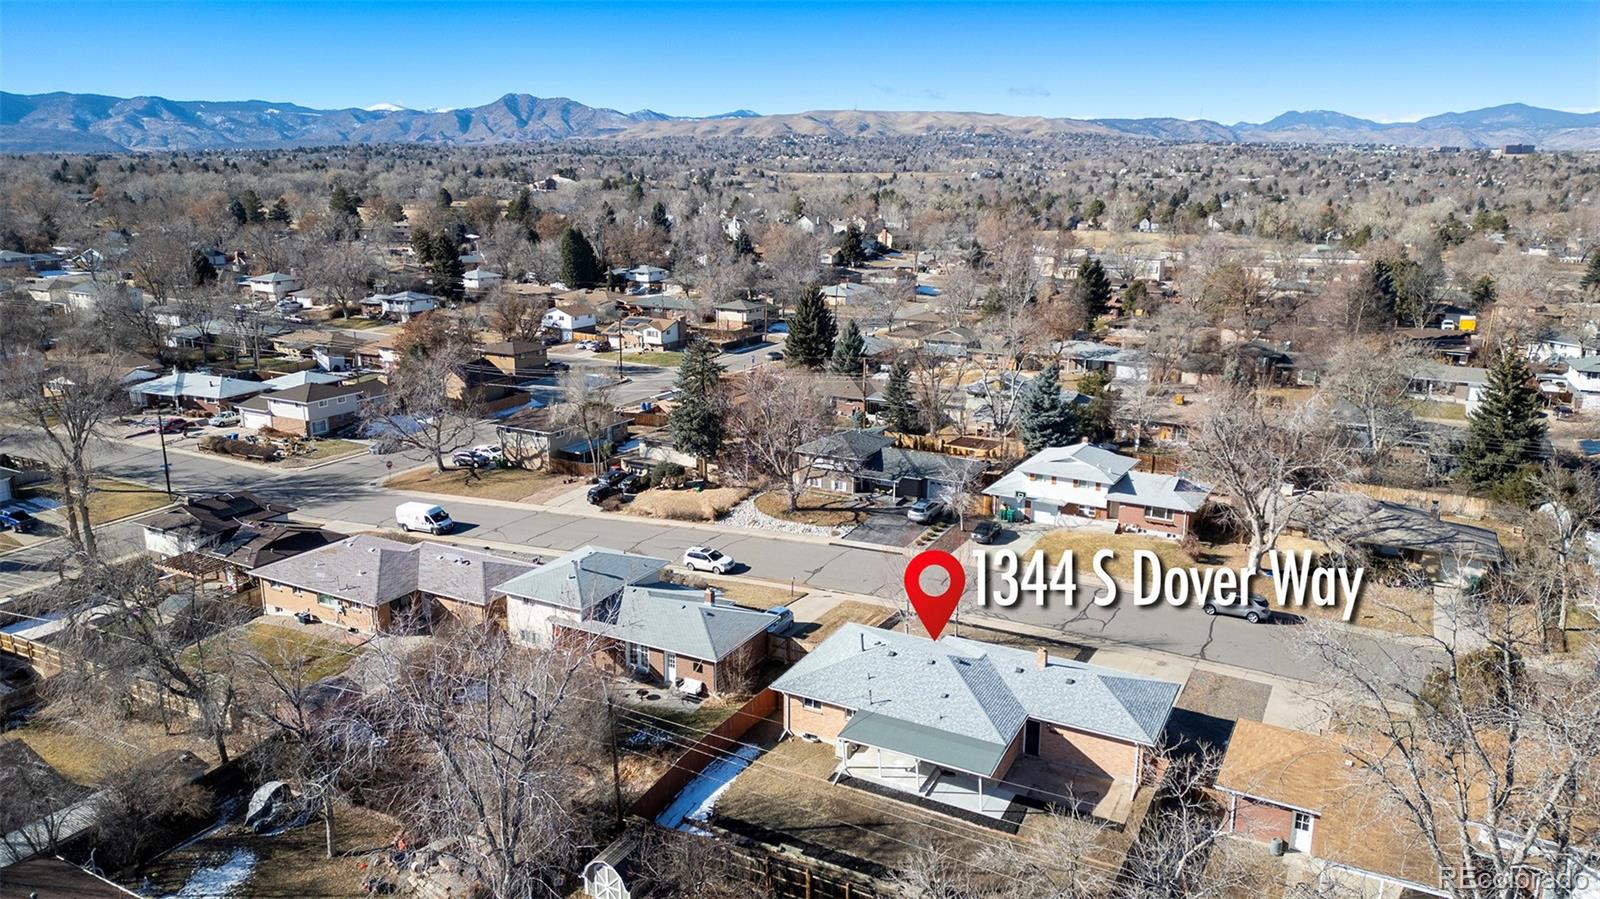 Report Image for 1344 S Dover Way,Lakewood, Colorado